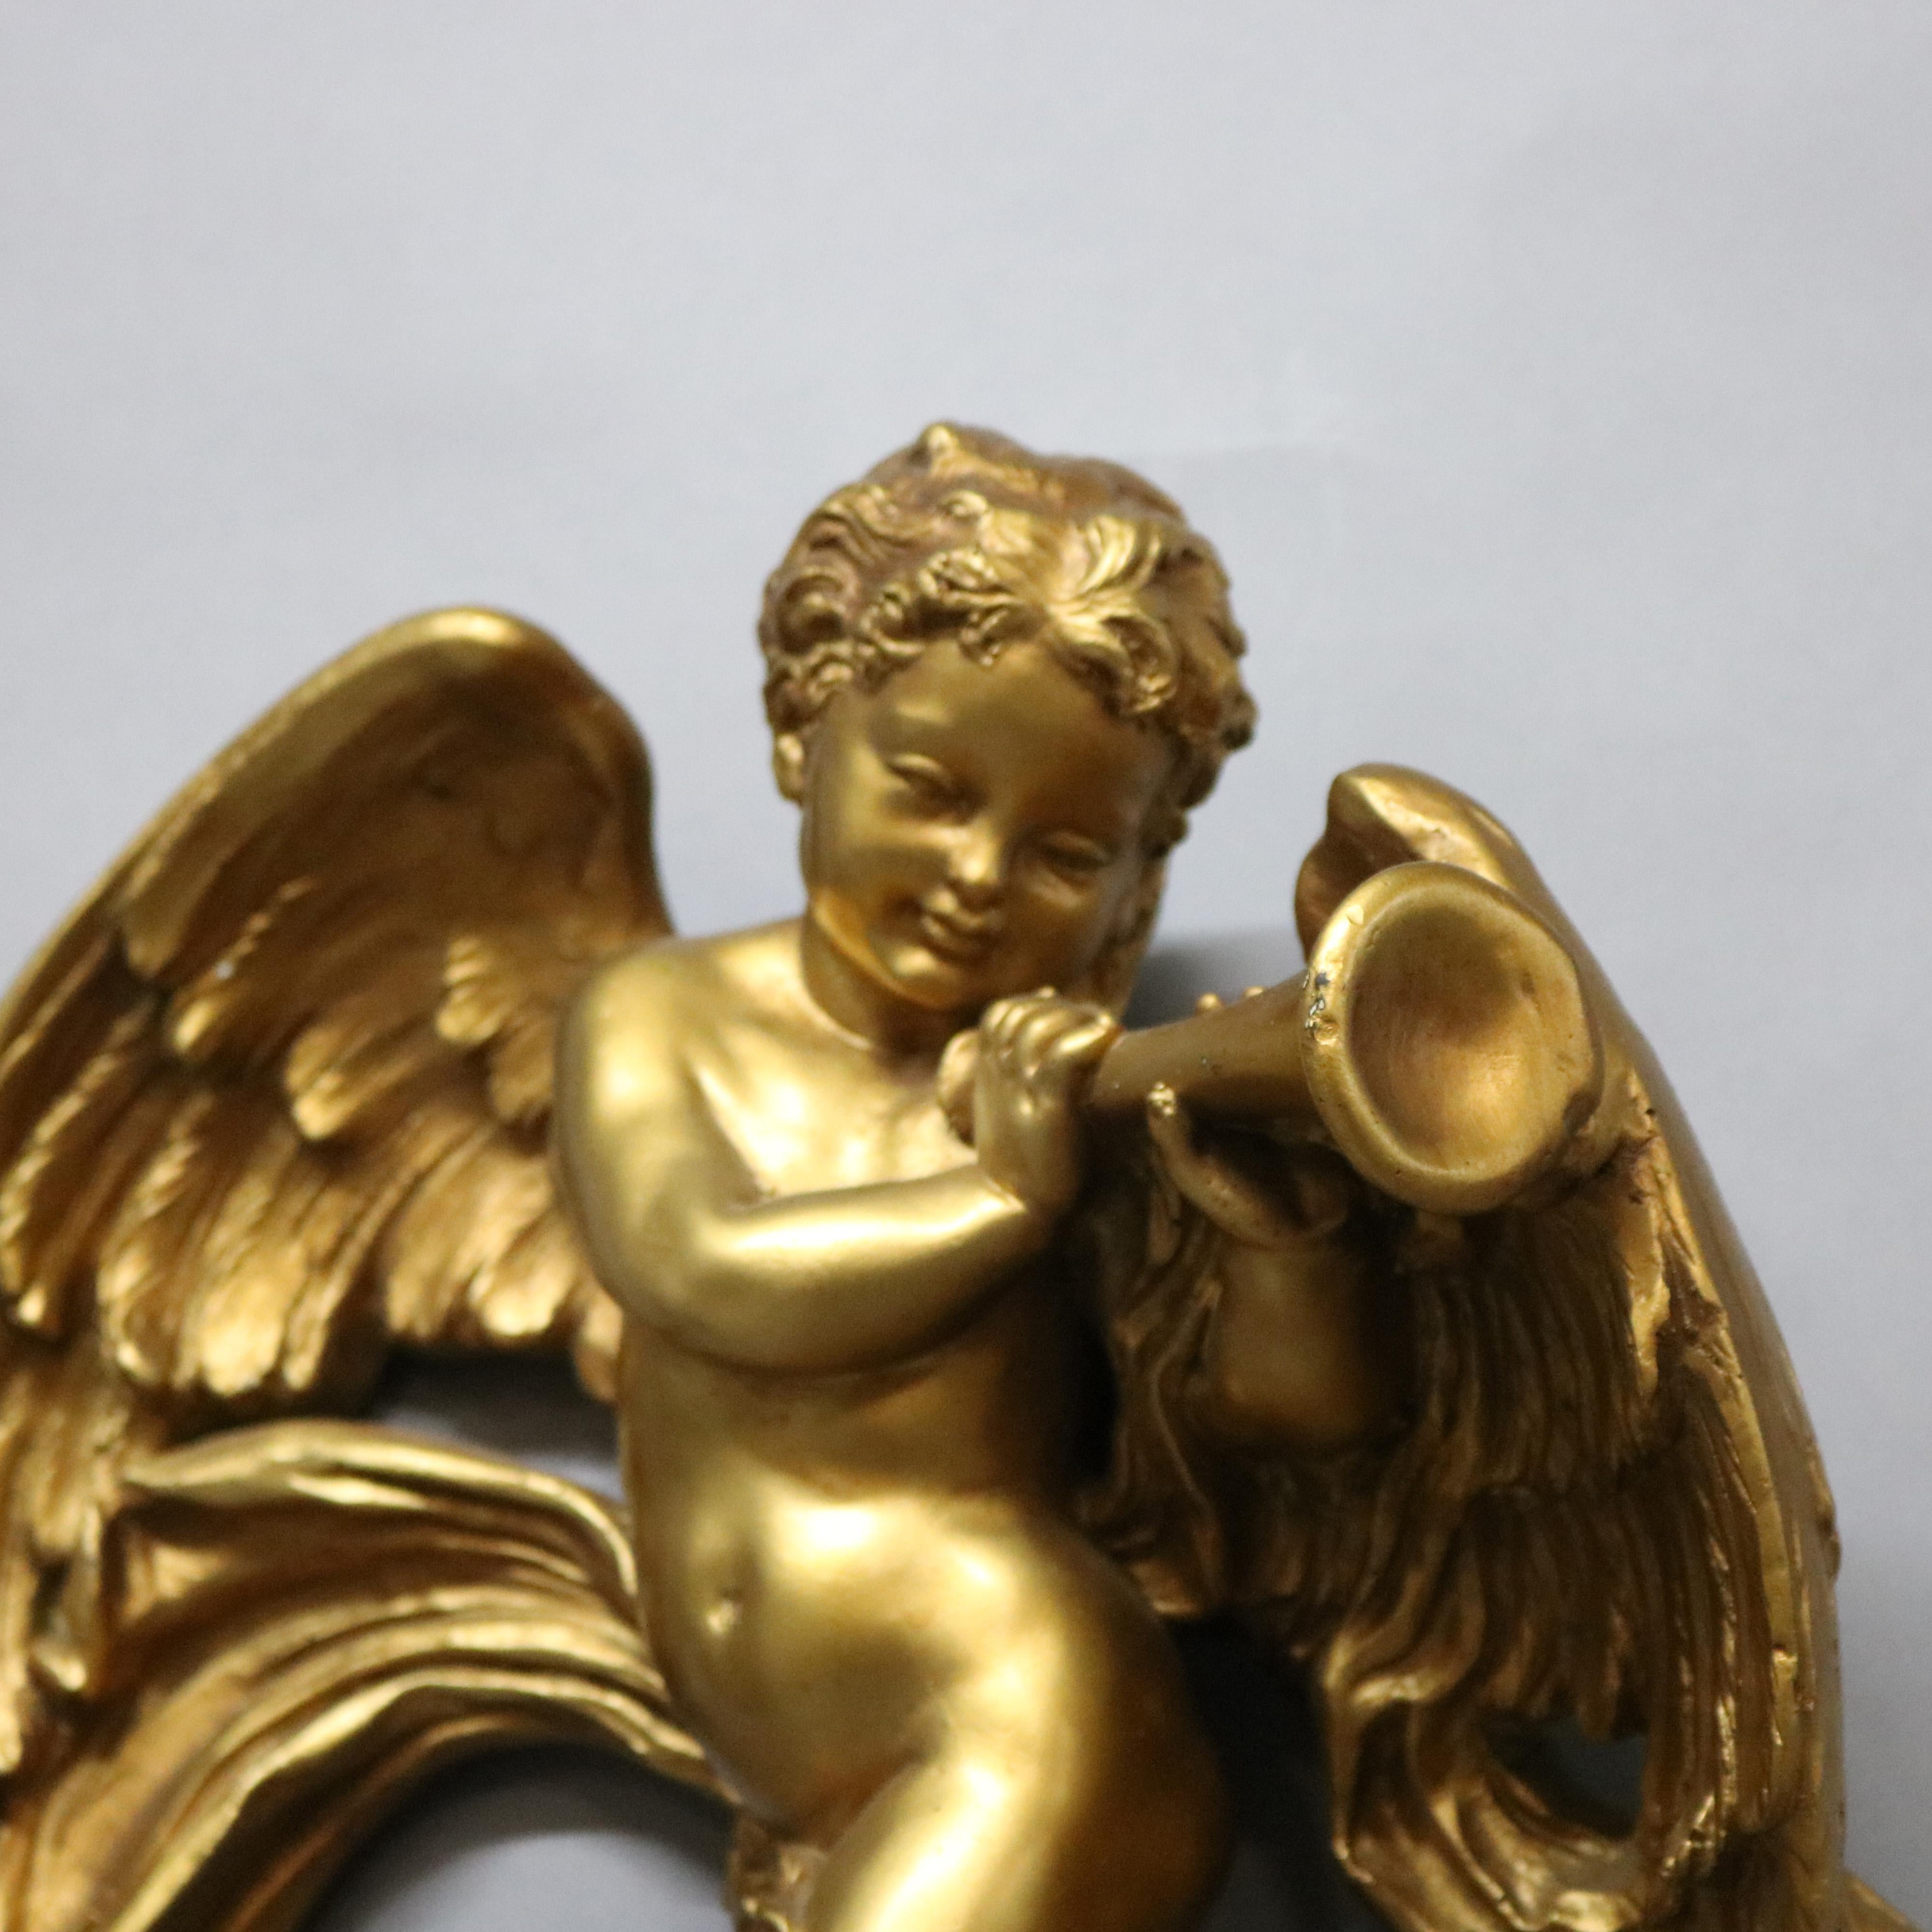 A vintage neoclassical wall sculpture offers gilt plaster construction and depicts a cherub or angel with horn and cloud, 20th century

Measures - 14.5